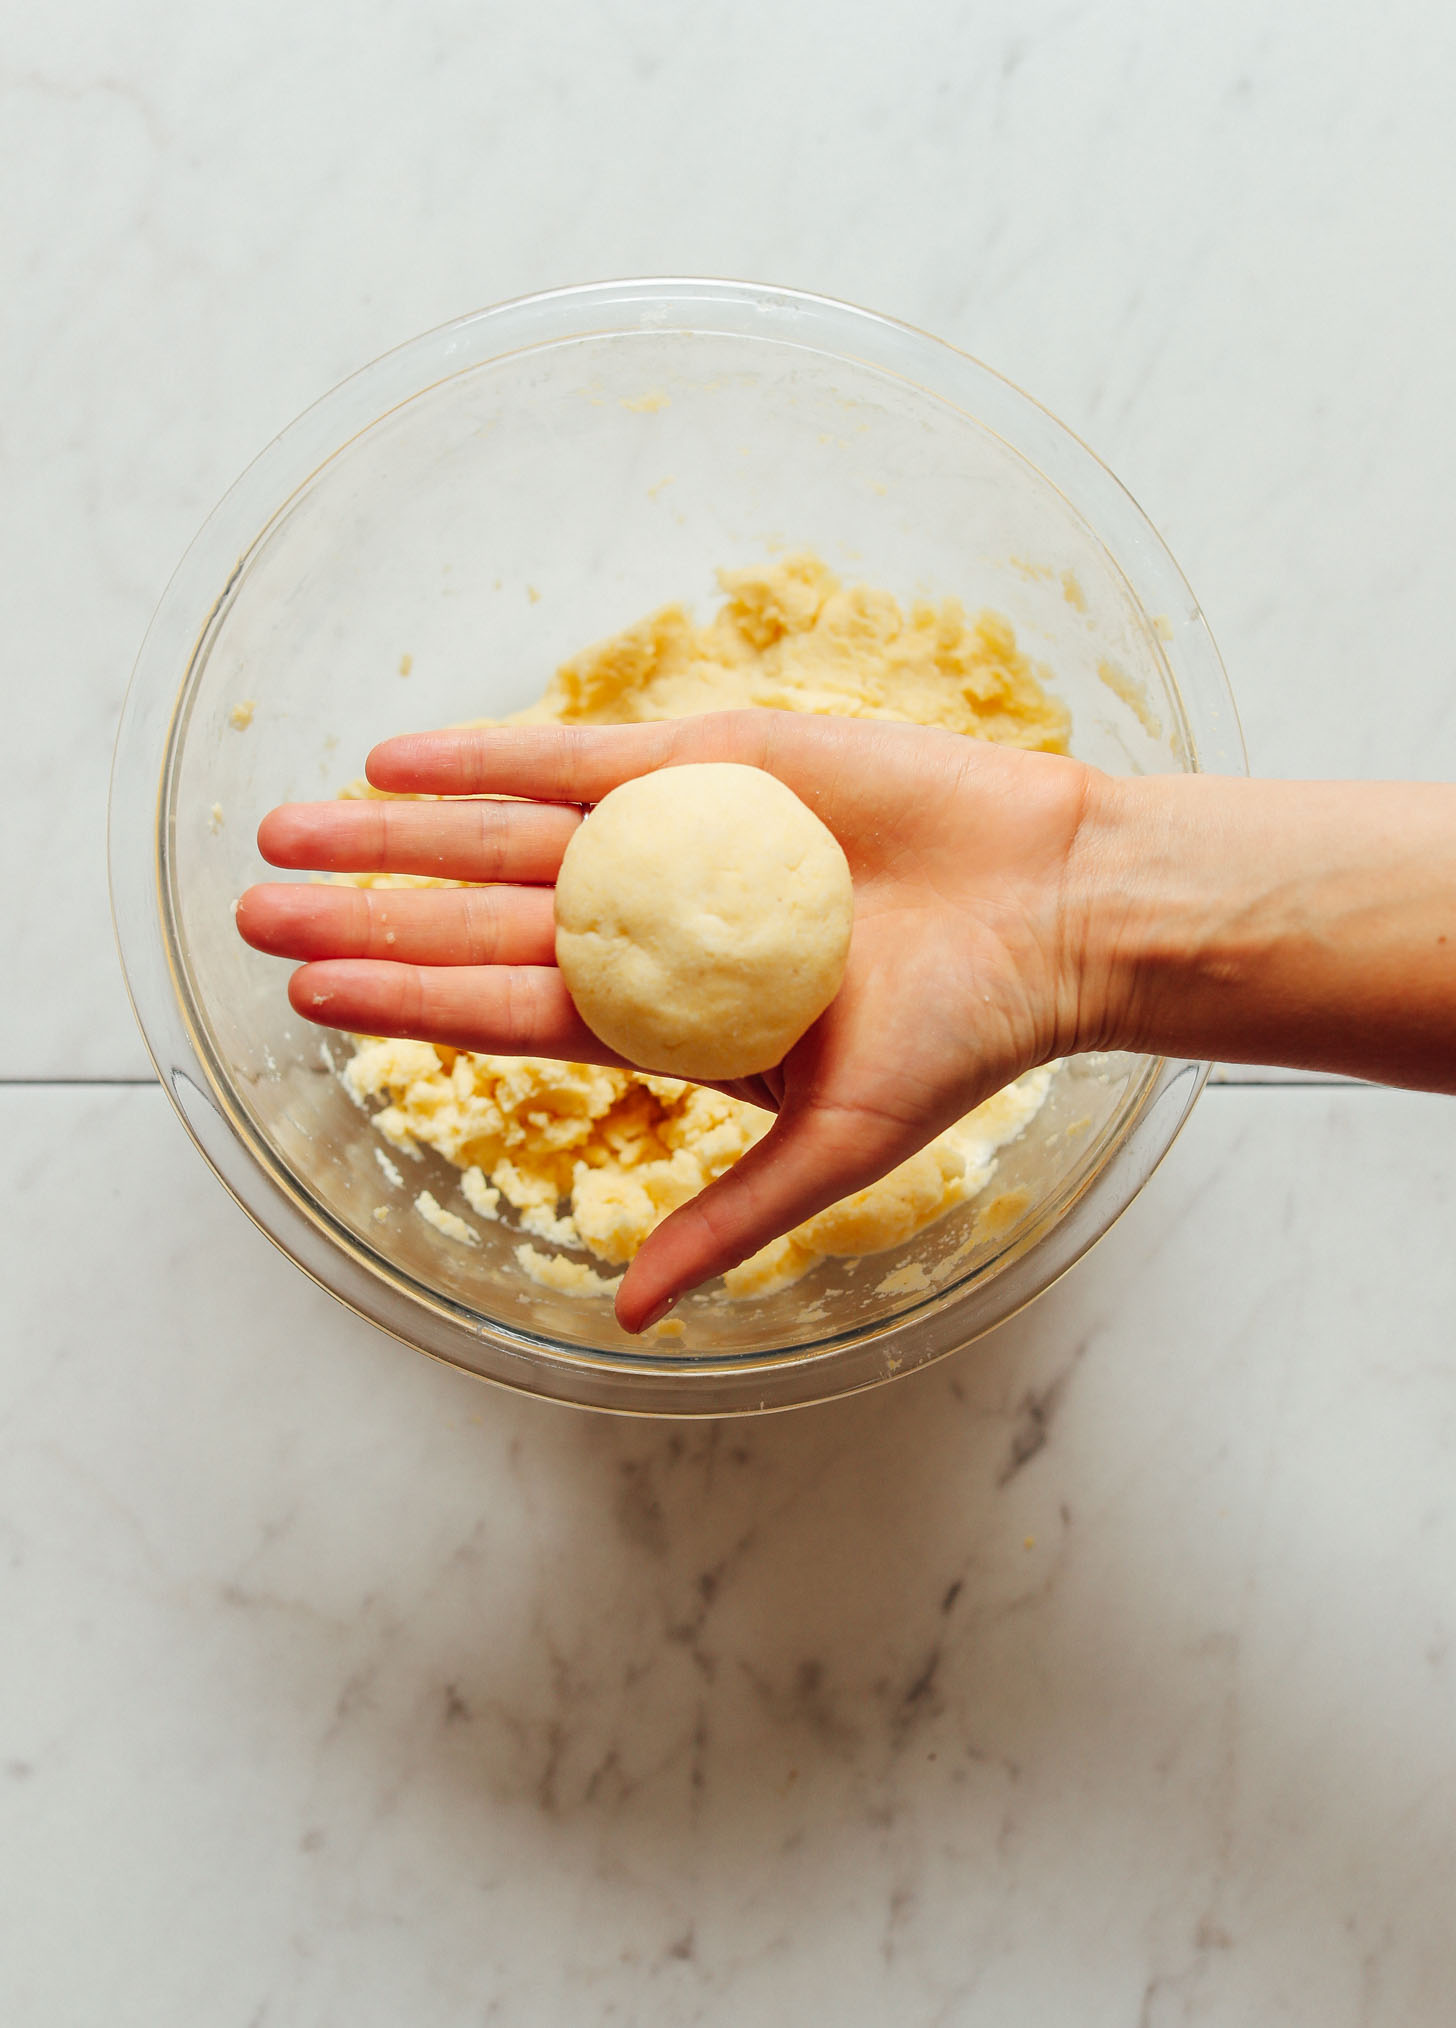 Holding a freshly rolled ball of arepa dough